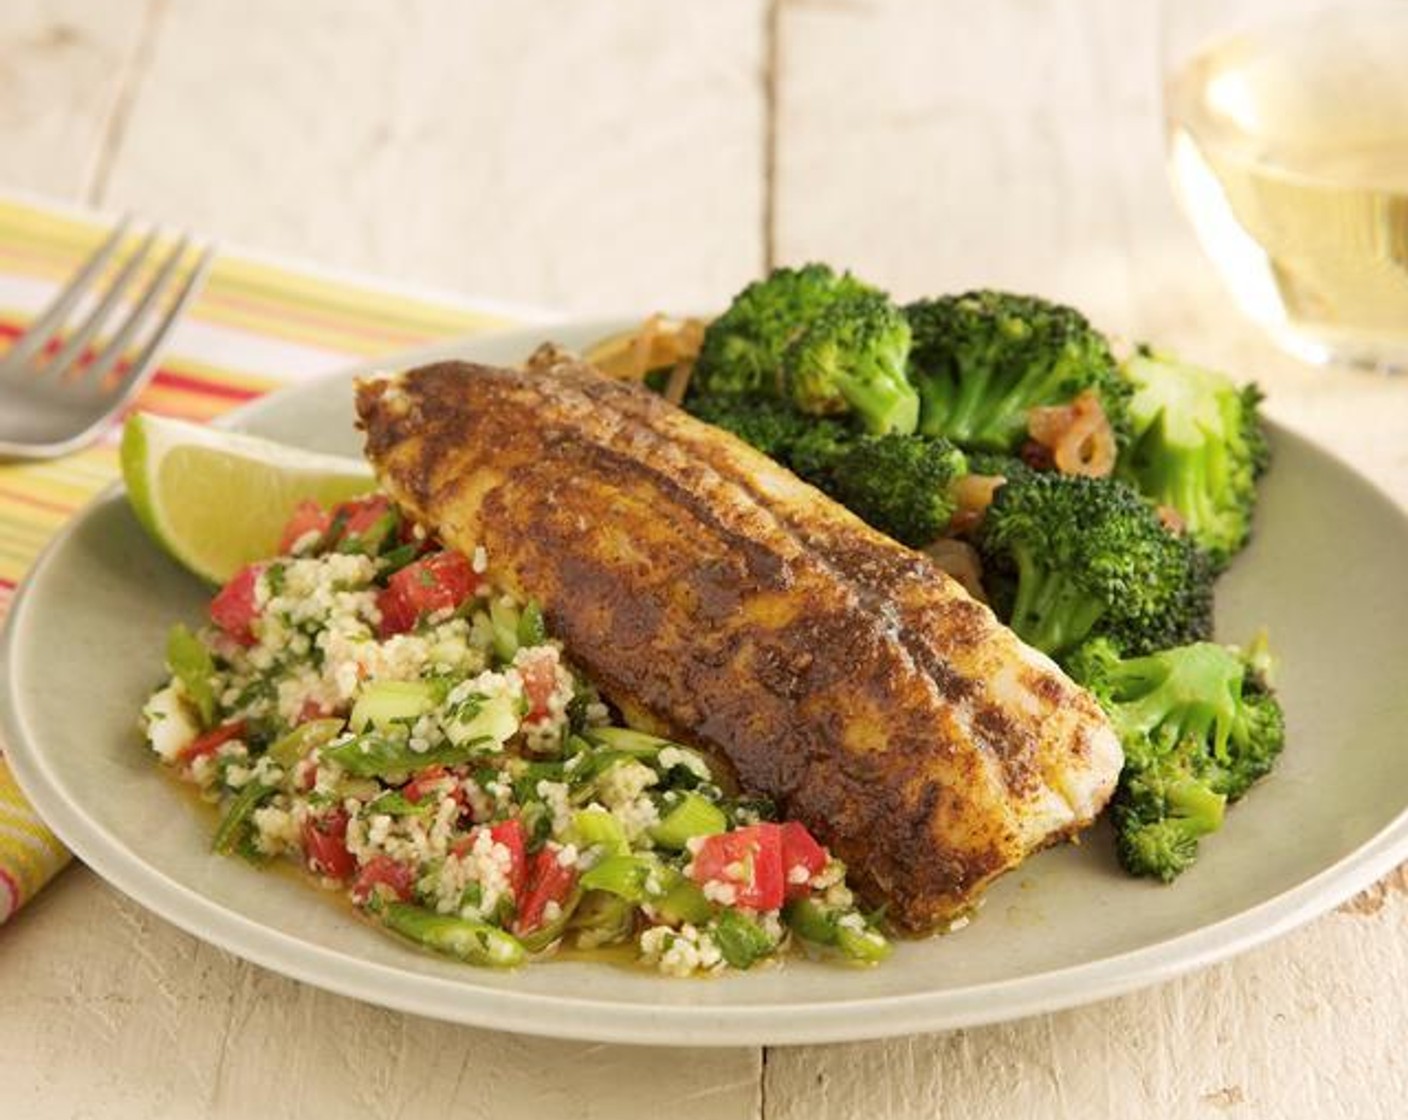 North African Spiced Cod with Herbed Couscous